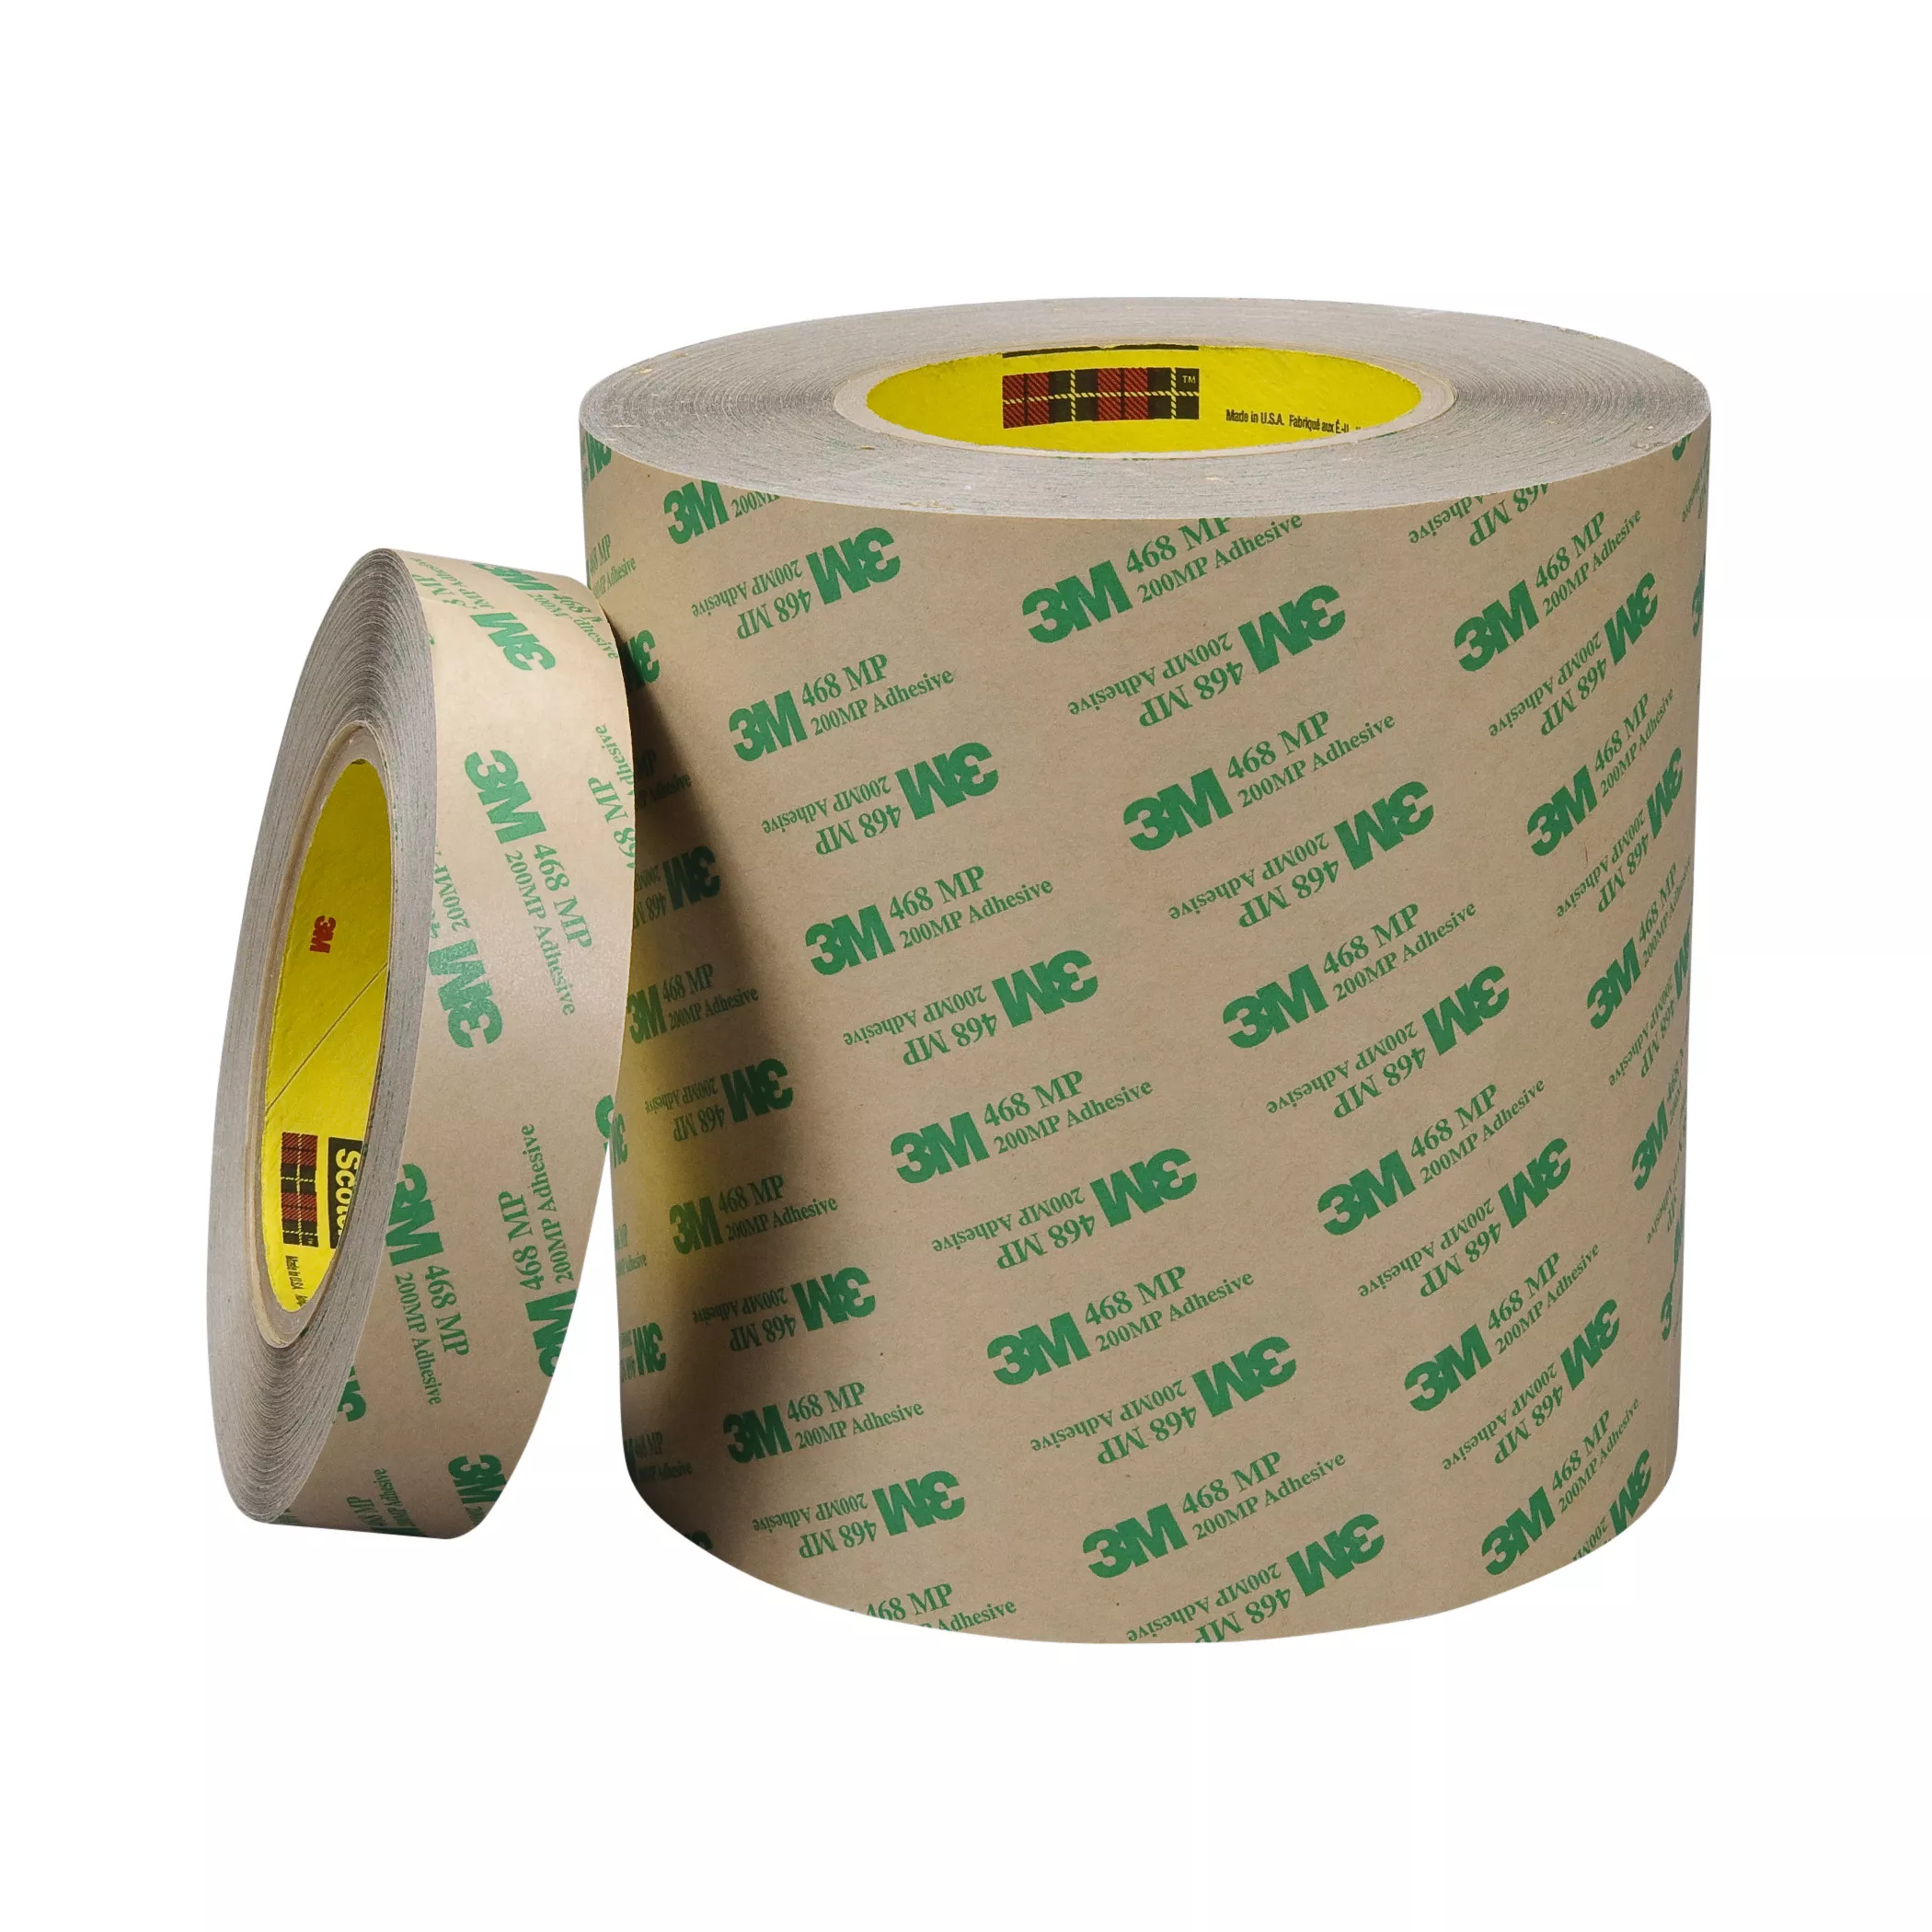 3M™ Adhesive Transfer Tape 468MP, Clear, 24 in x 180 yd, 5 mil, 1
Roll/Case